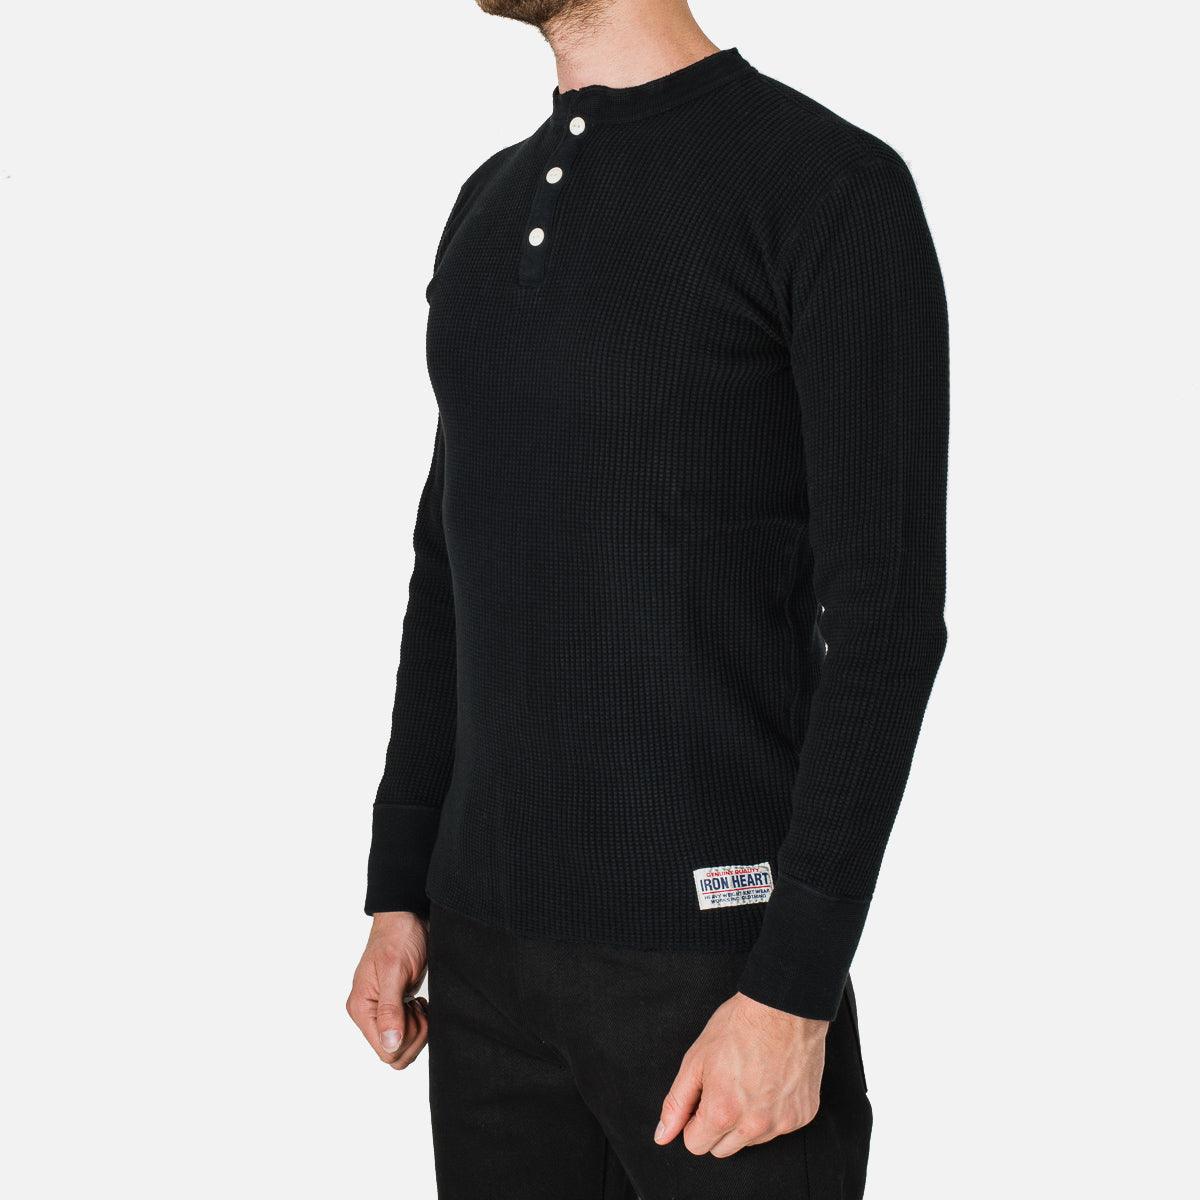 IHTL-1213-BLK - Waffle Knit Long Sleeved Thermal Henley Black